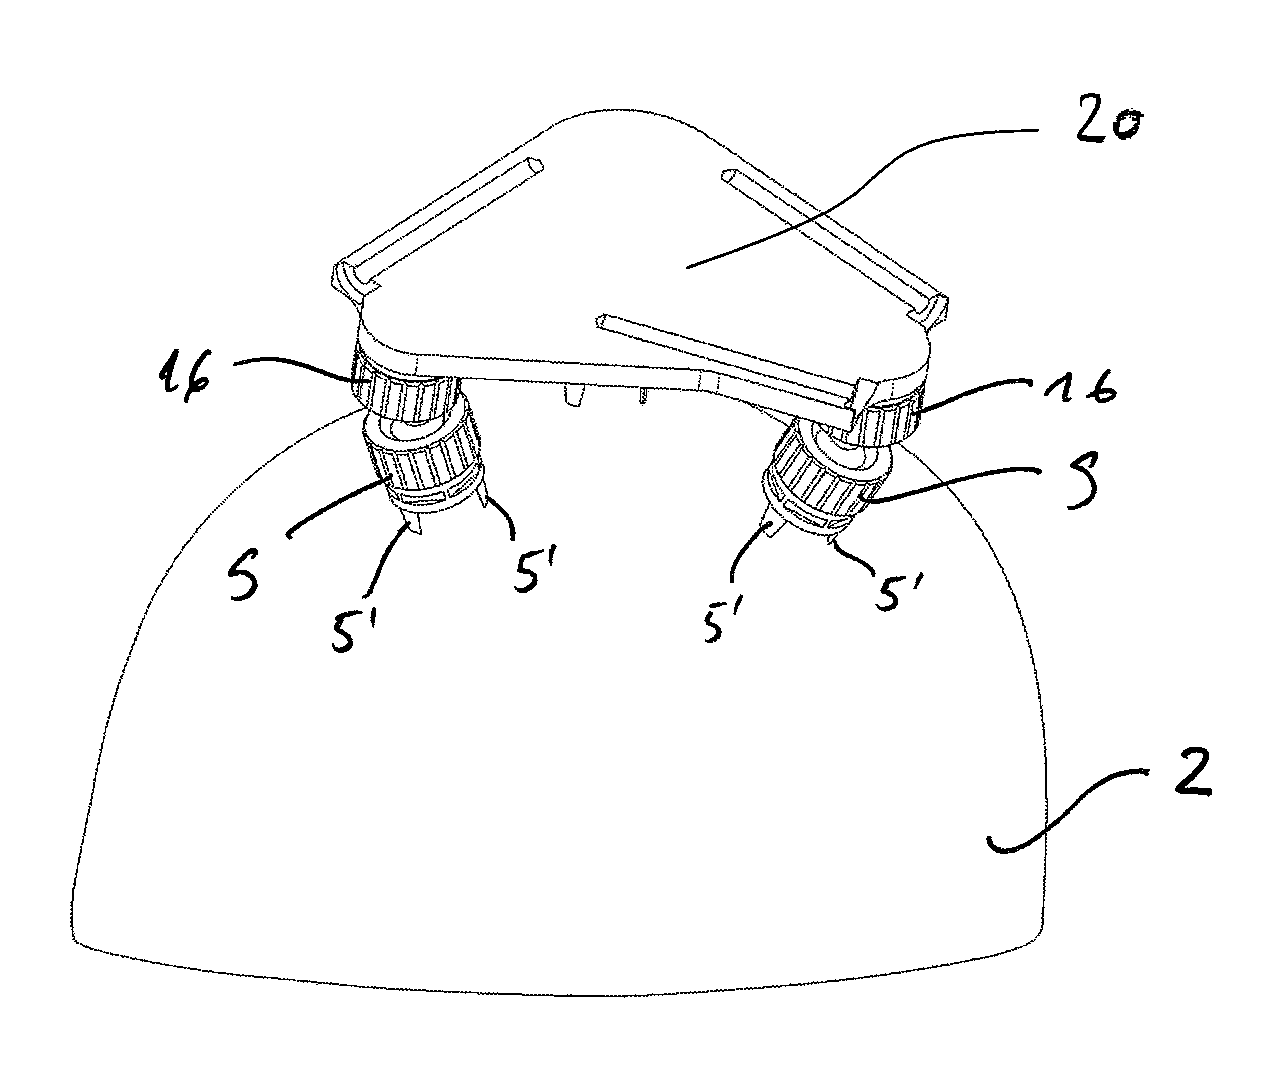 Adjustable fixation system for neurosurgical devices